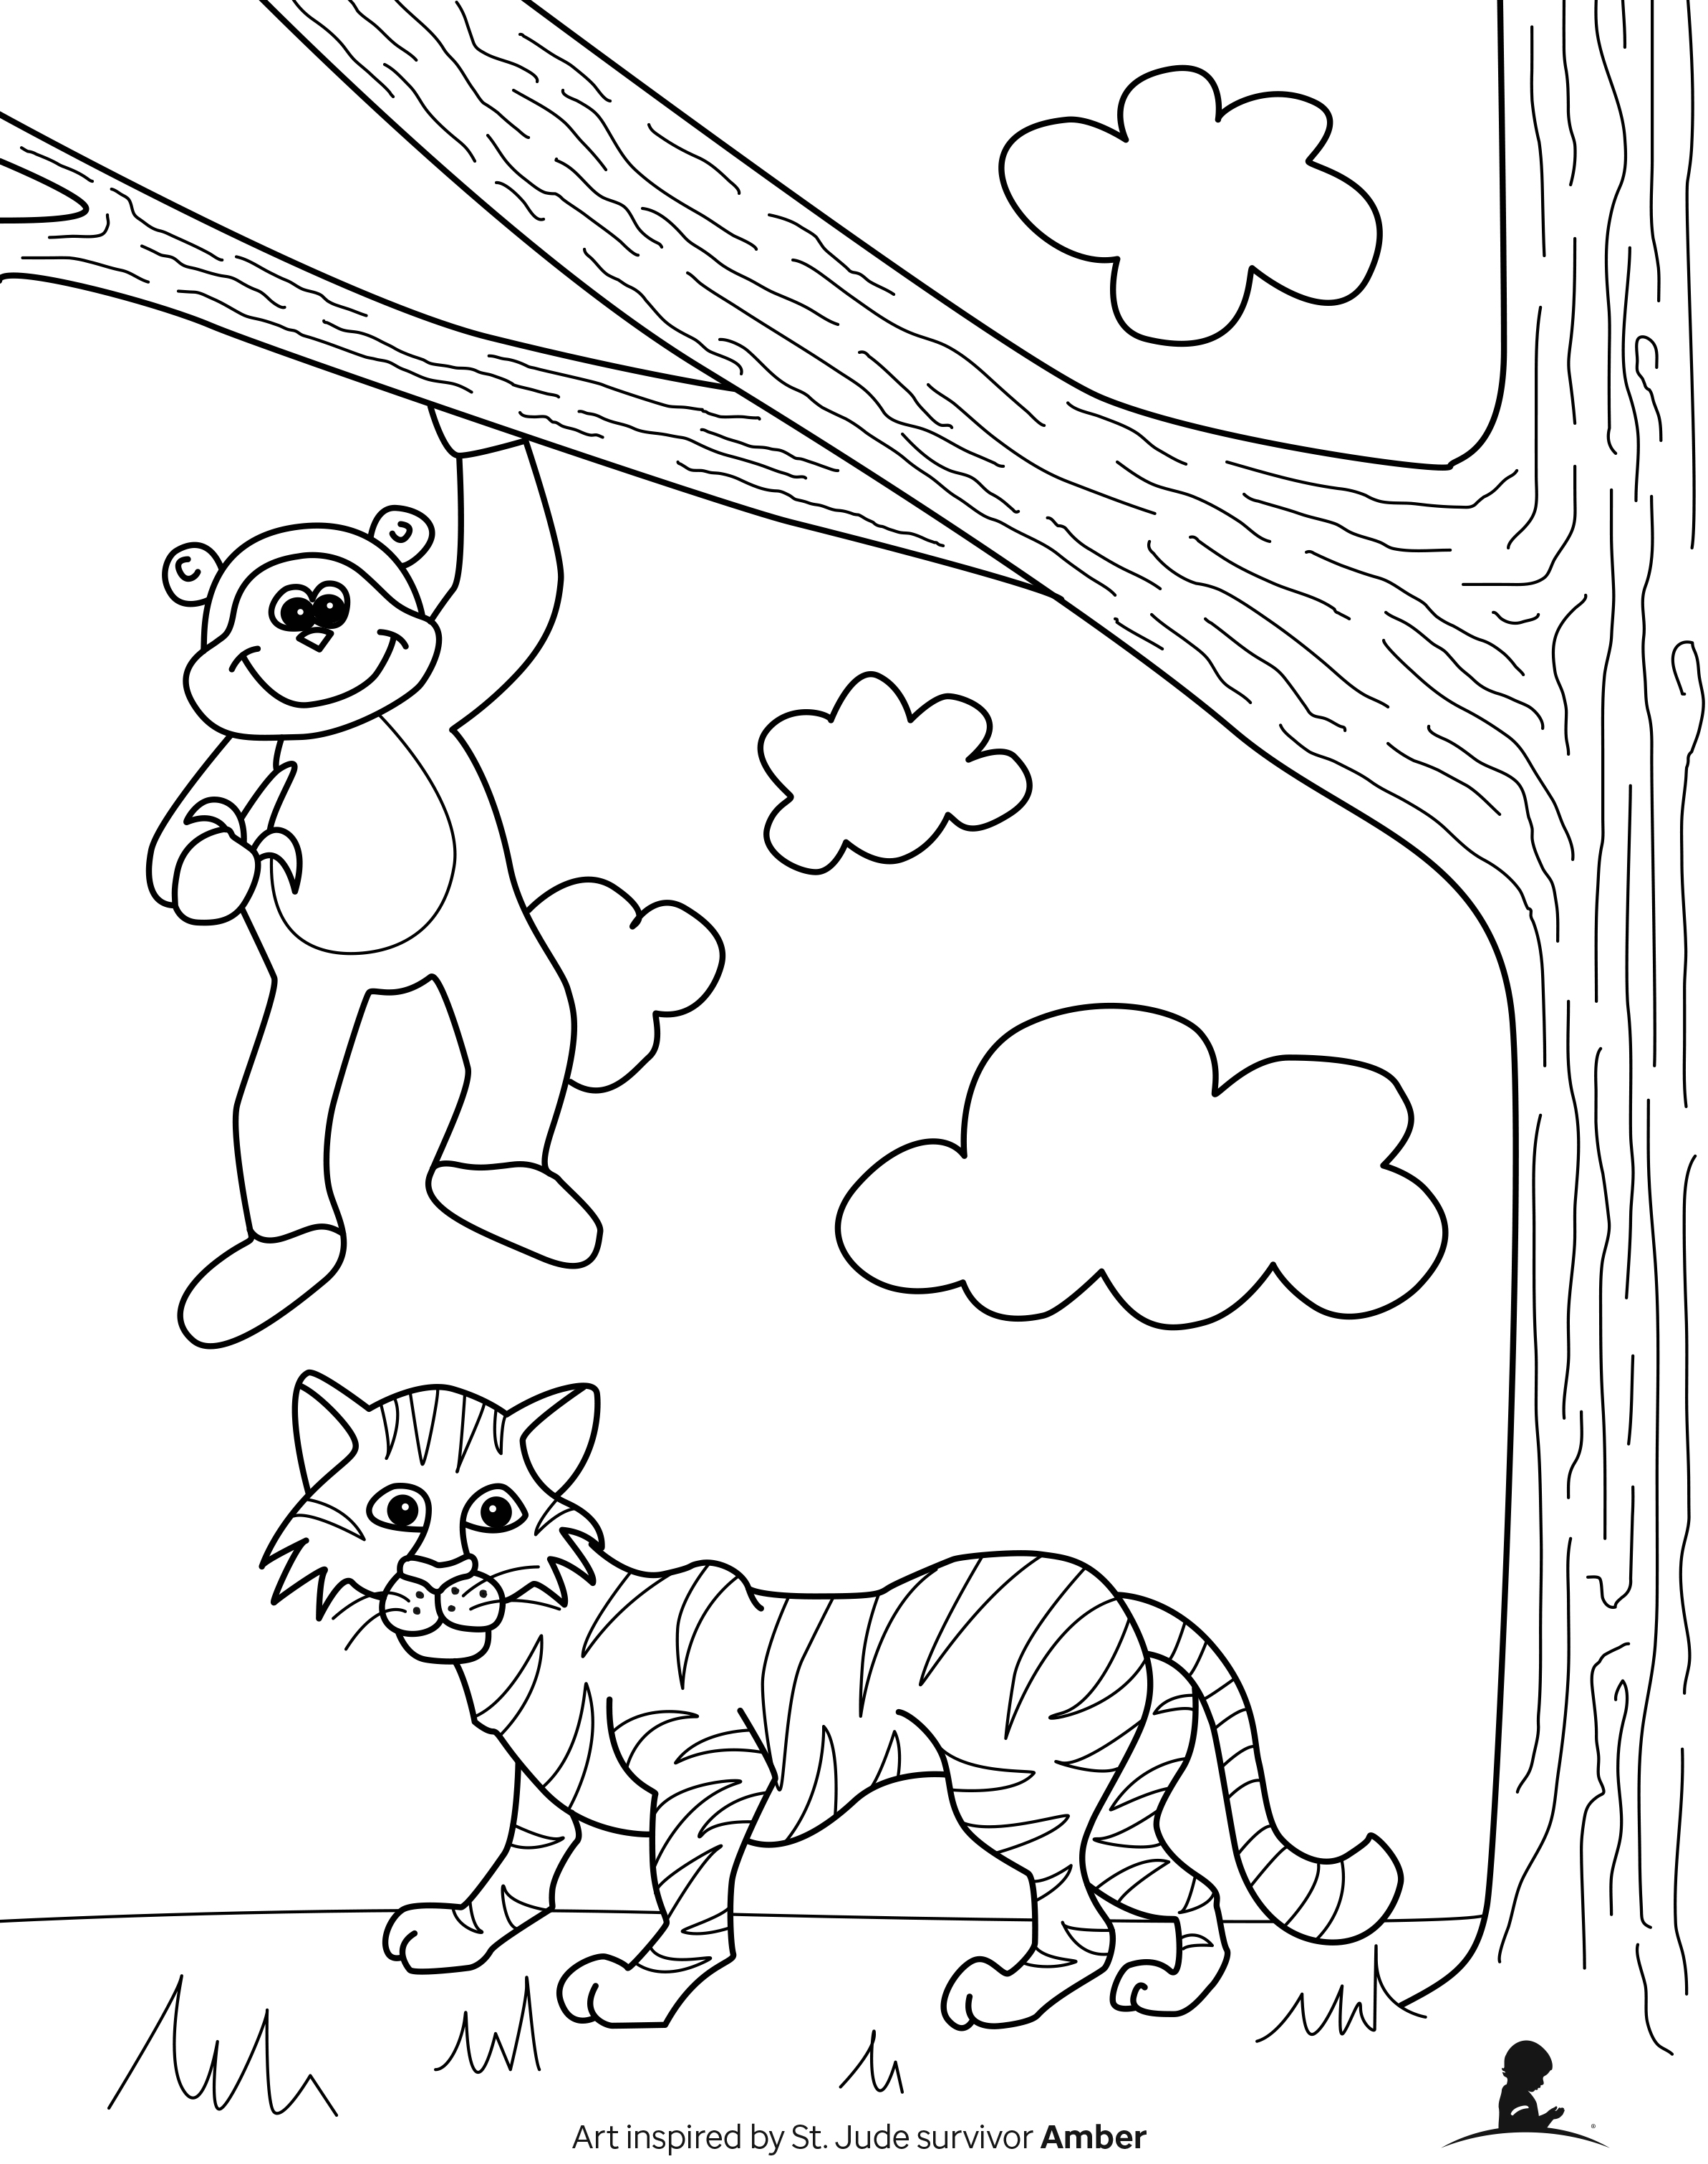 Coloring Pages and Games for Kids Print for Free   St. Jude ...